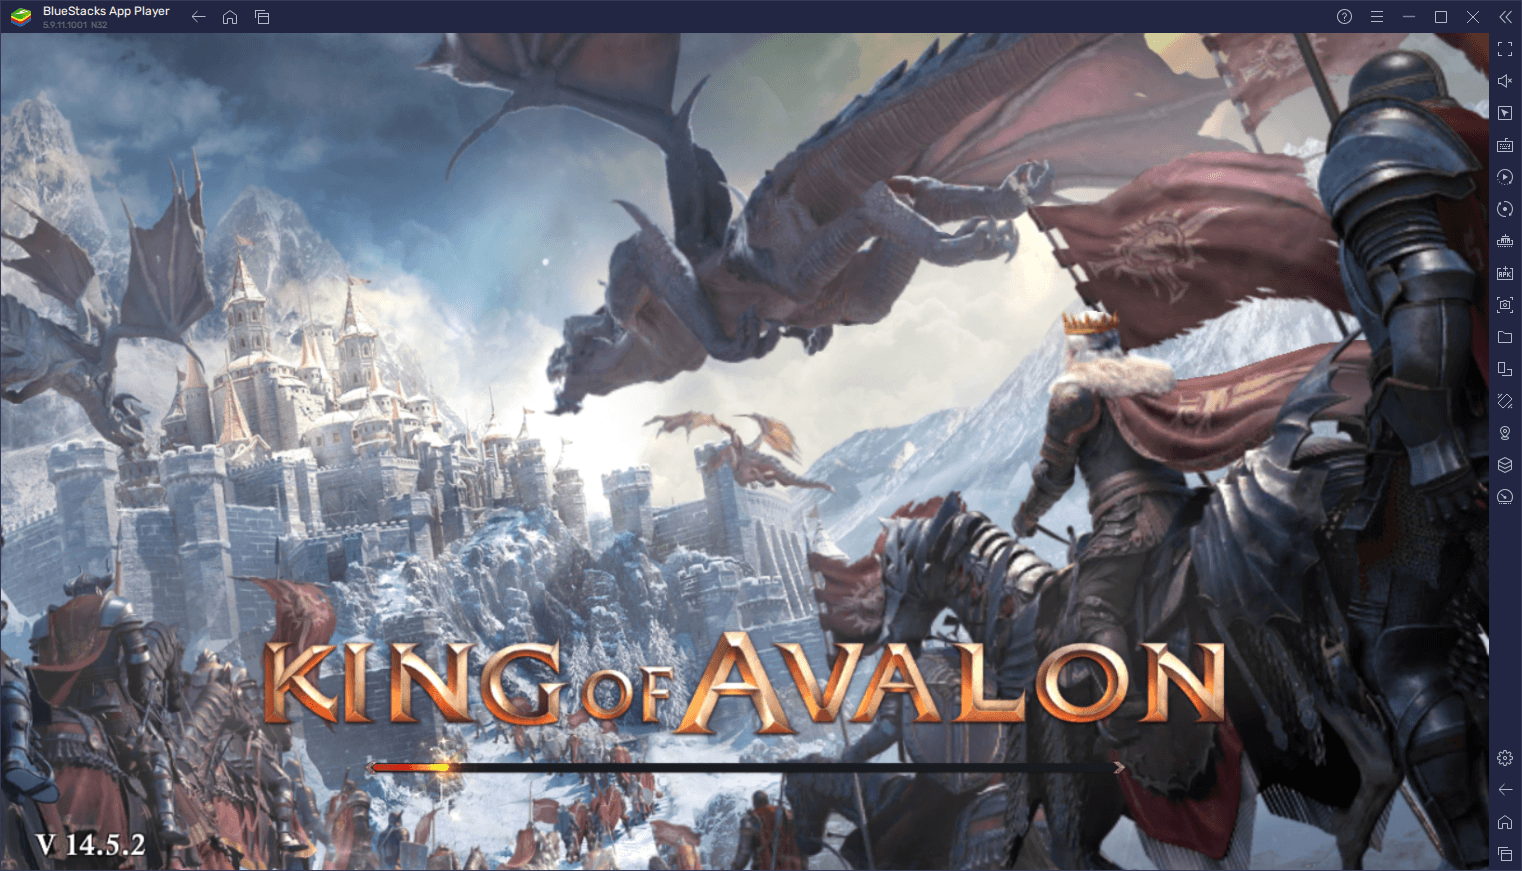 How to Play King of Avalon on PC With BlueStacks